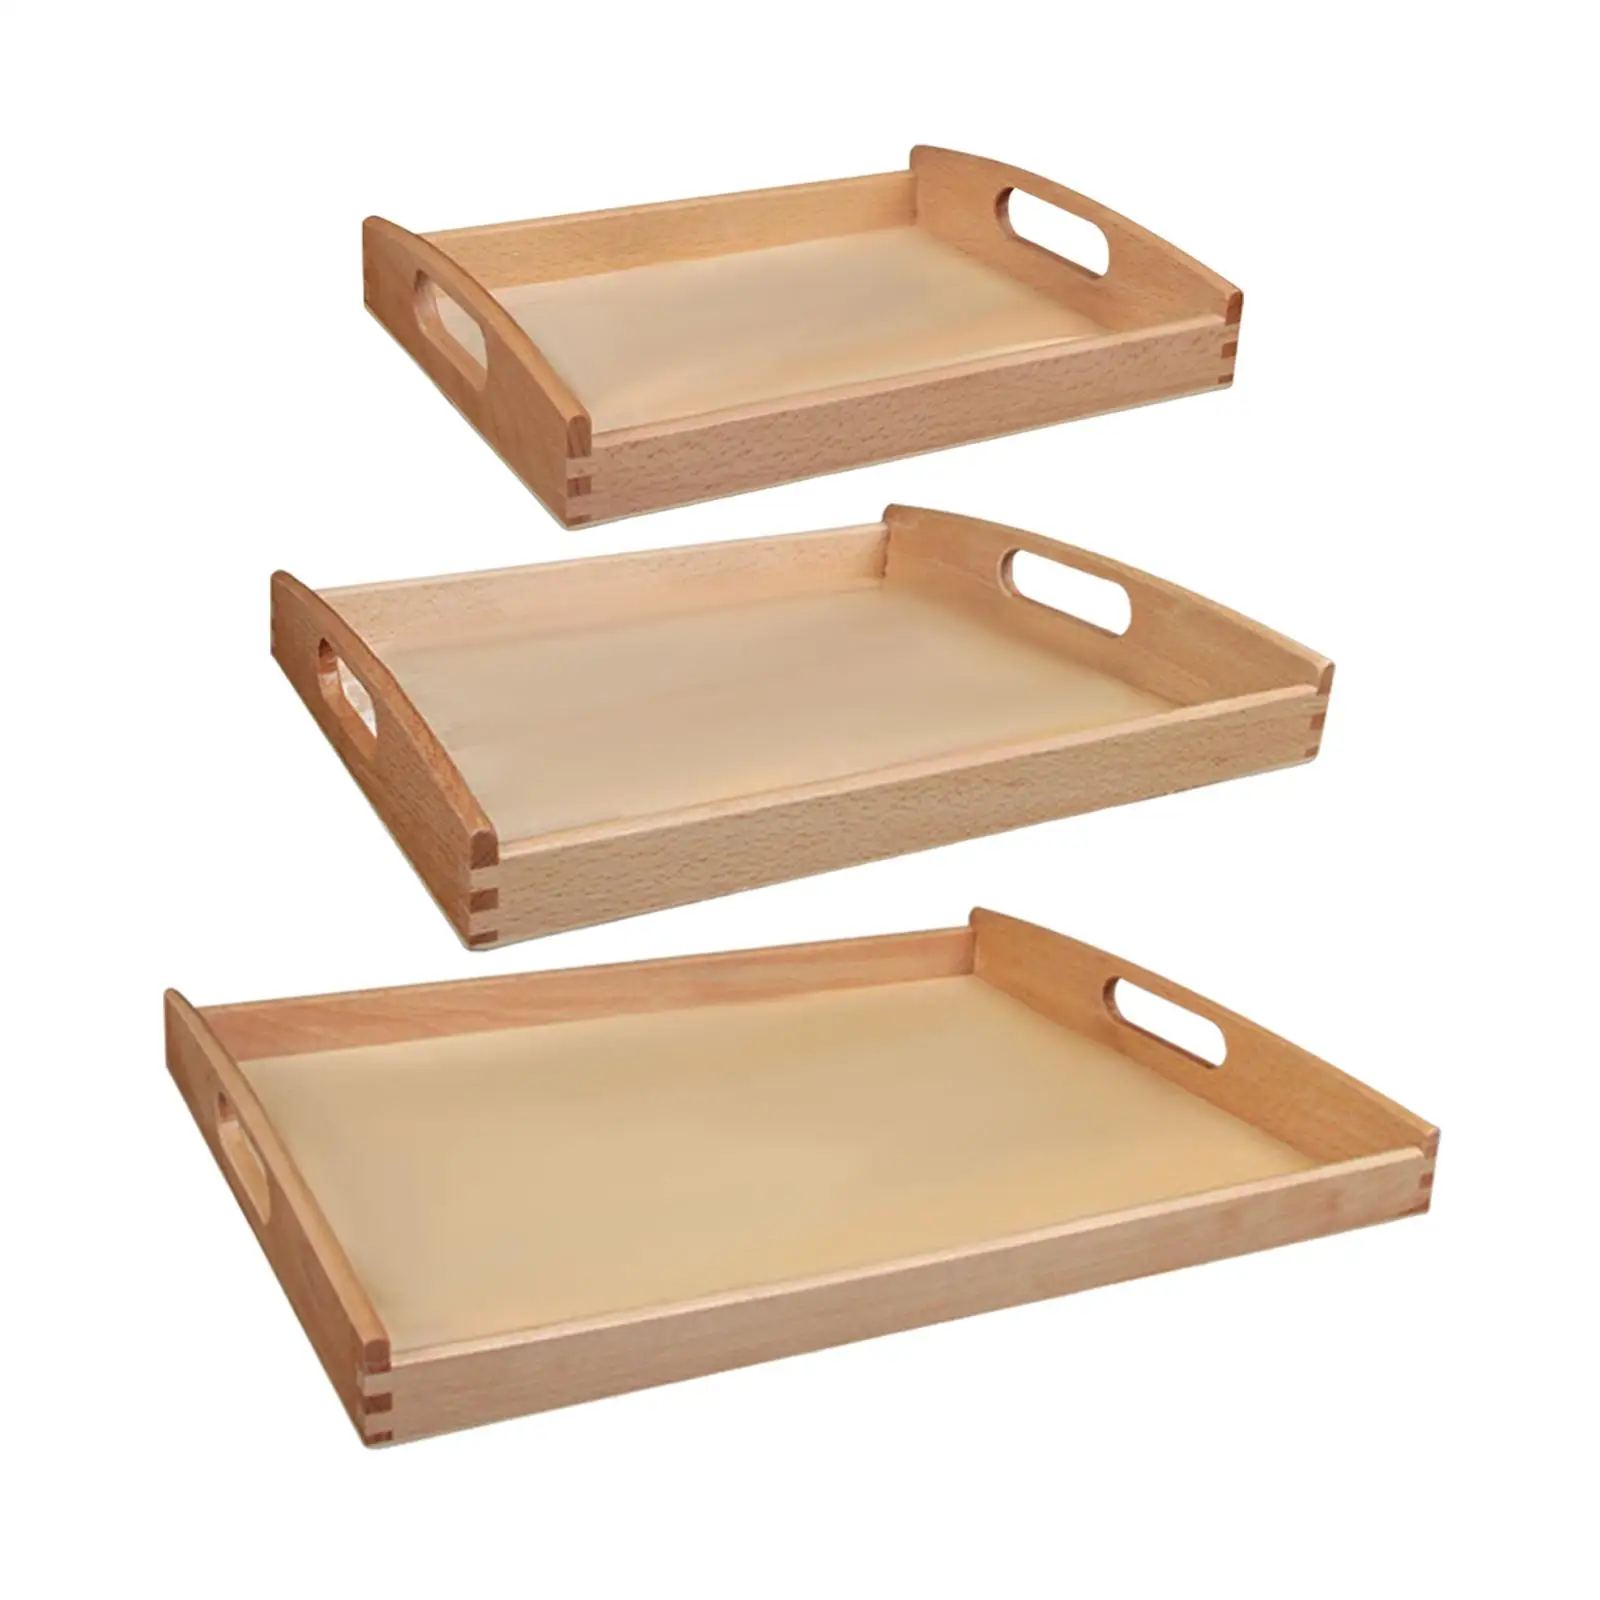 Wooden Montessori Tray Rectangular Shape with Handle Education Toys Unfinished for Kitchen